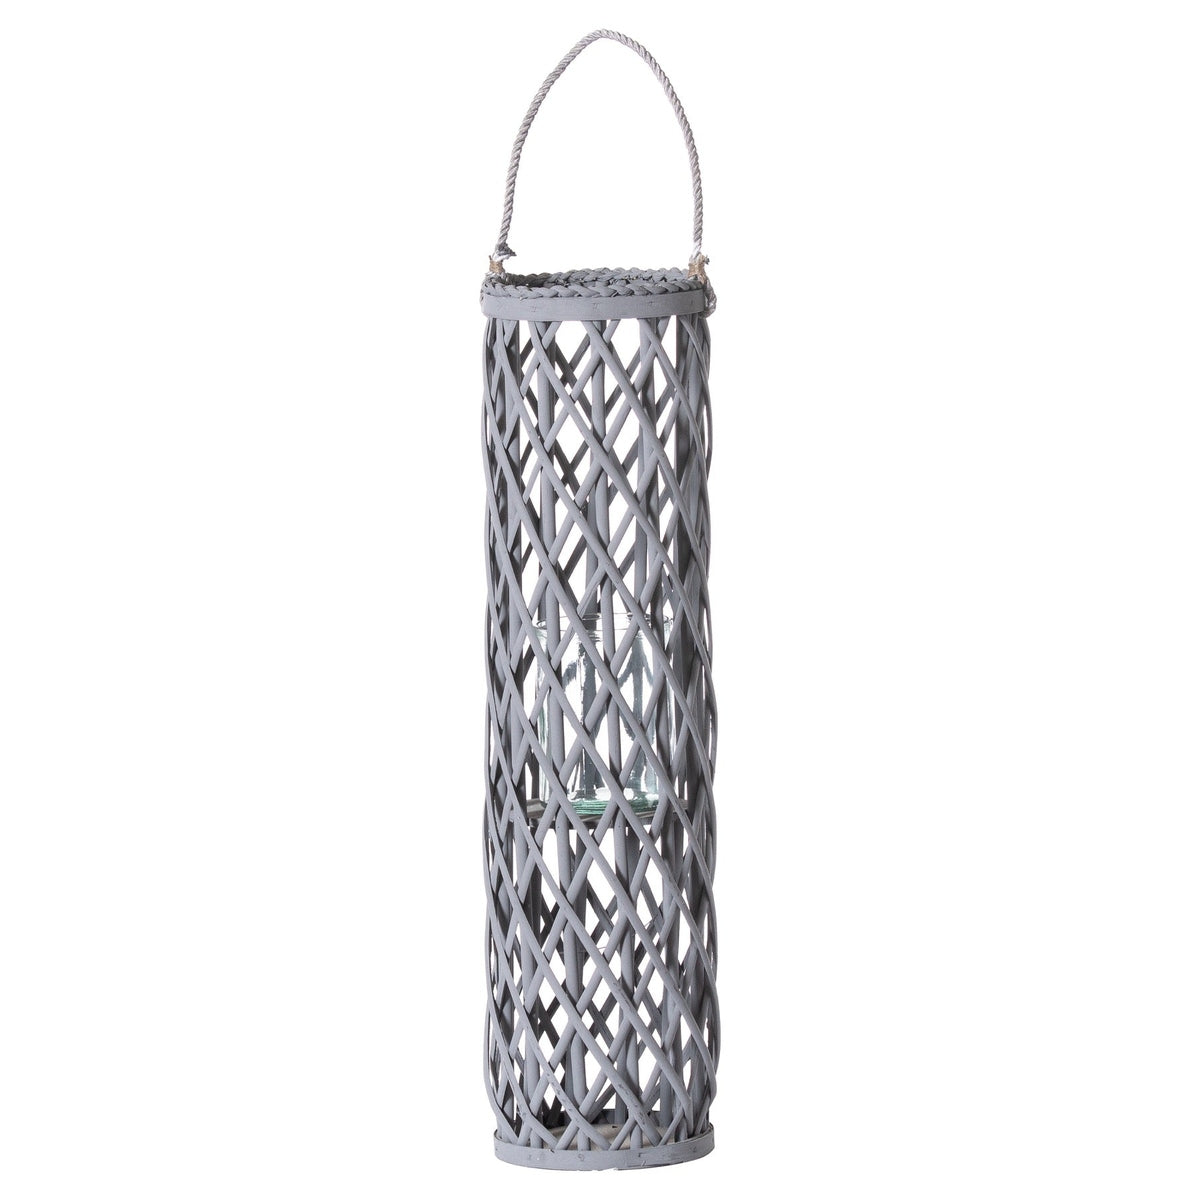 Hill Interiors Wicker Lantern With Glass Hurricane In Grey Large